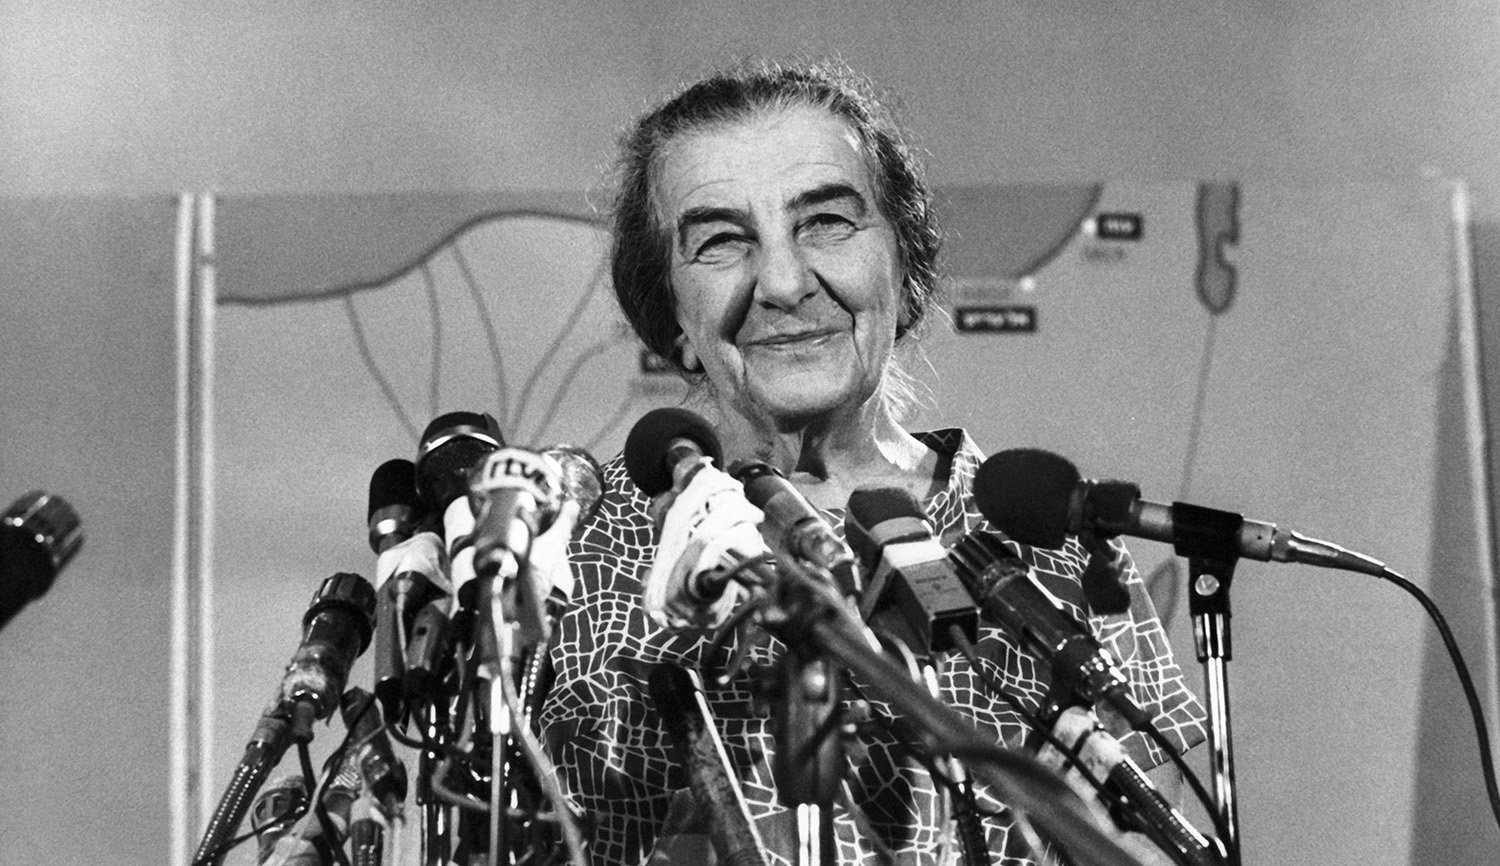 
Golda Meir at a press conference in Paris on October 20, 1973. Bernard CHARLON/Gamma-Rapho via Getty Images.







